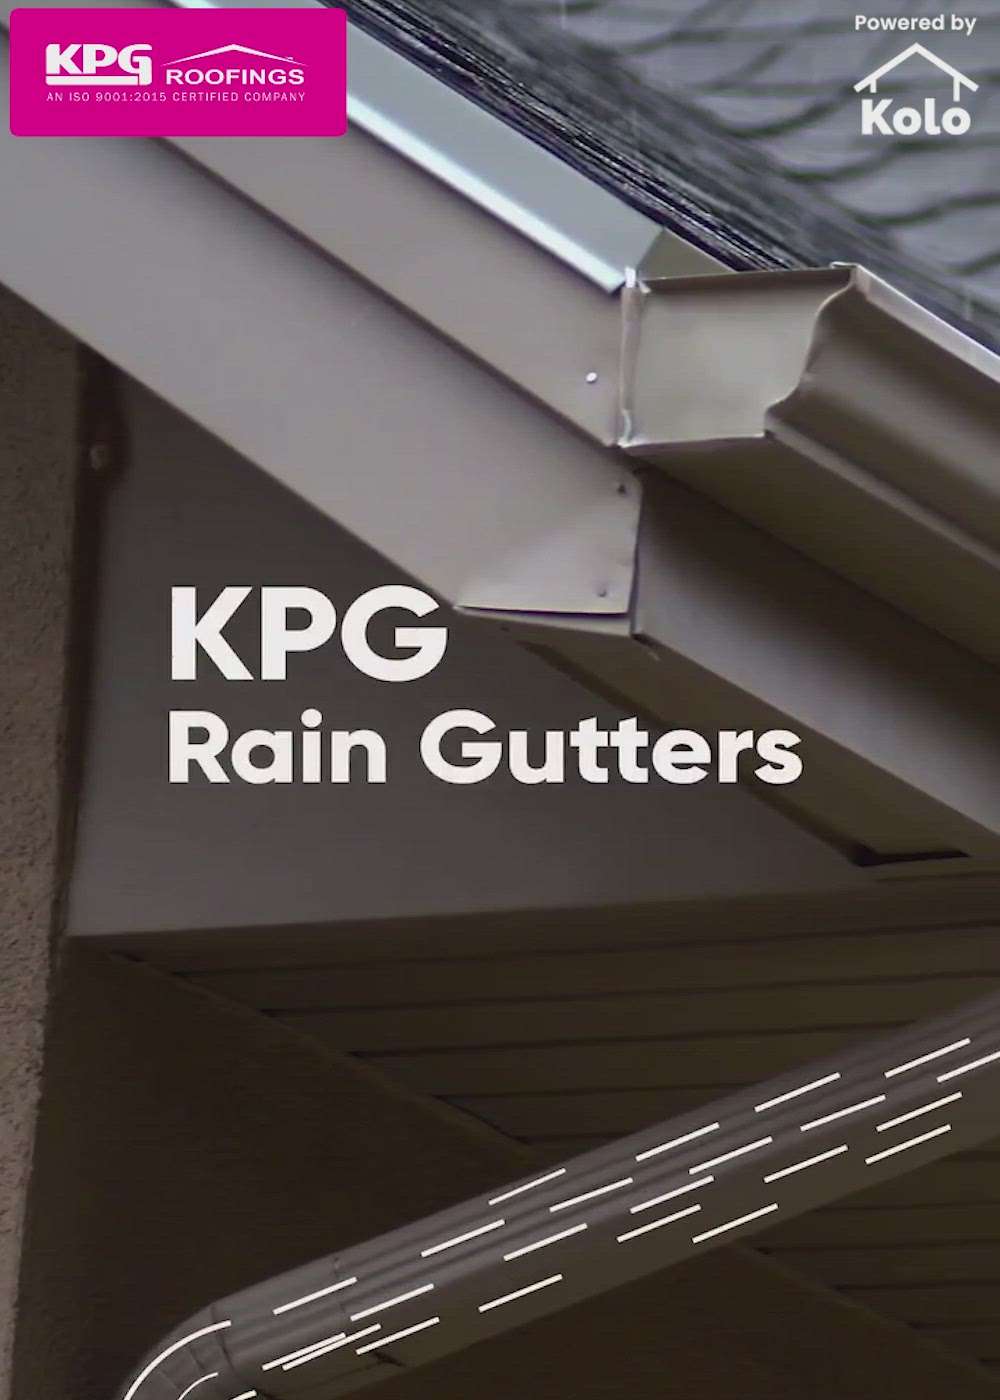 Rain Gutters from KPG Roofings 
Effective solution for removing rain water without leakage. 

#kpgroofings #updateyourhome #homedecor #kpg #roofingtile #tiles #homeroof #RoofingIdeas #kpgroofs #homerooofing #roof #Rainwater #rainwatergutter #rainwaterguttersystem